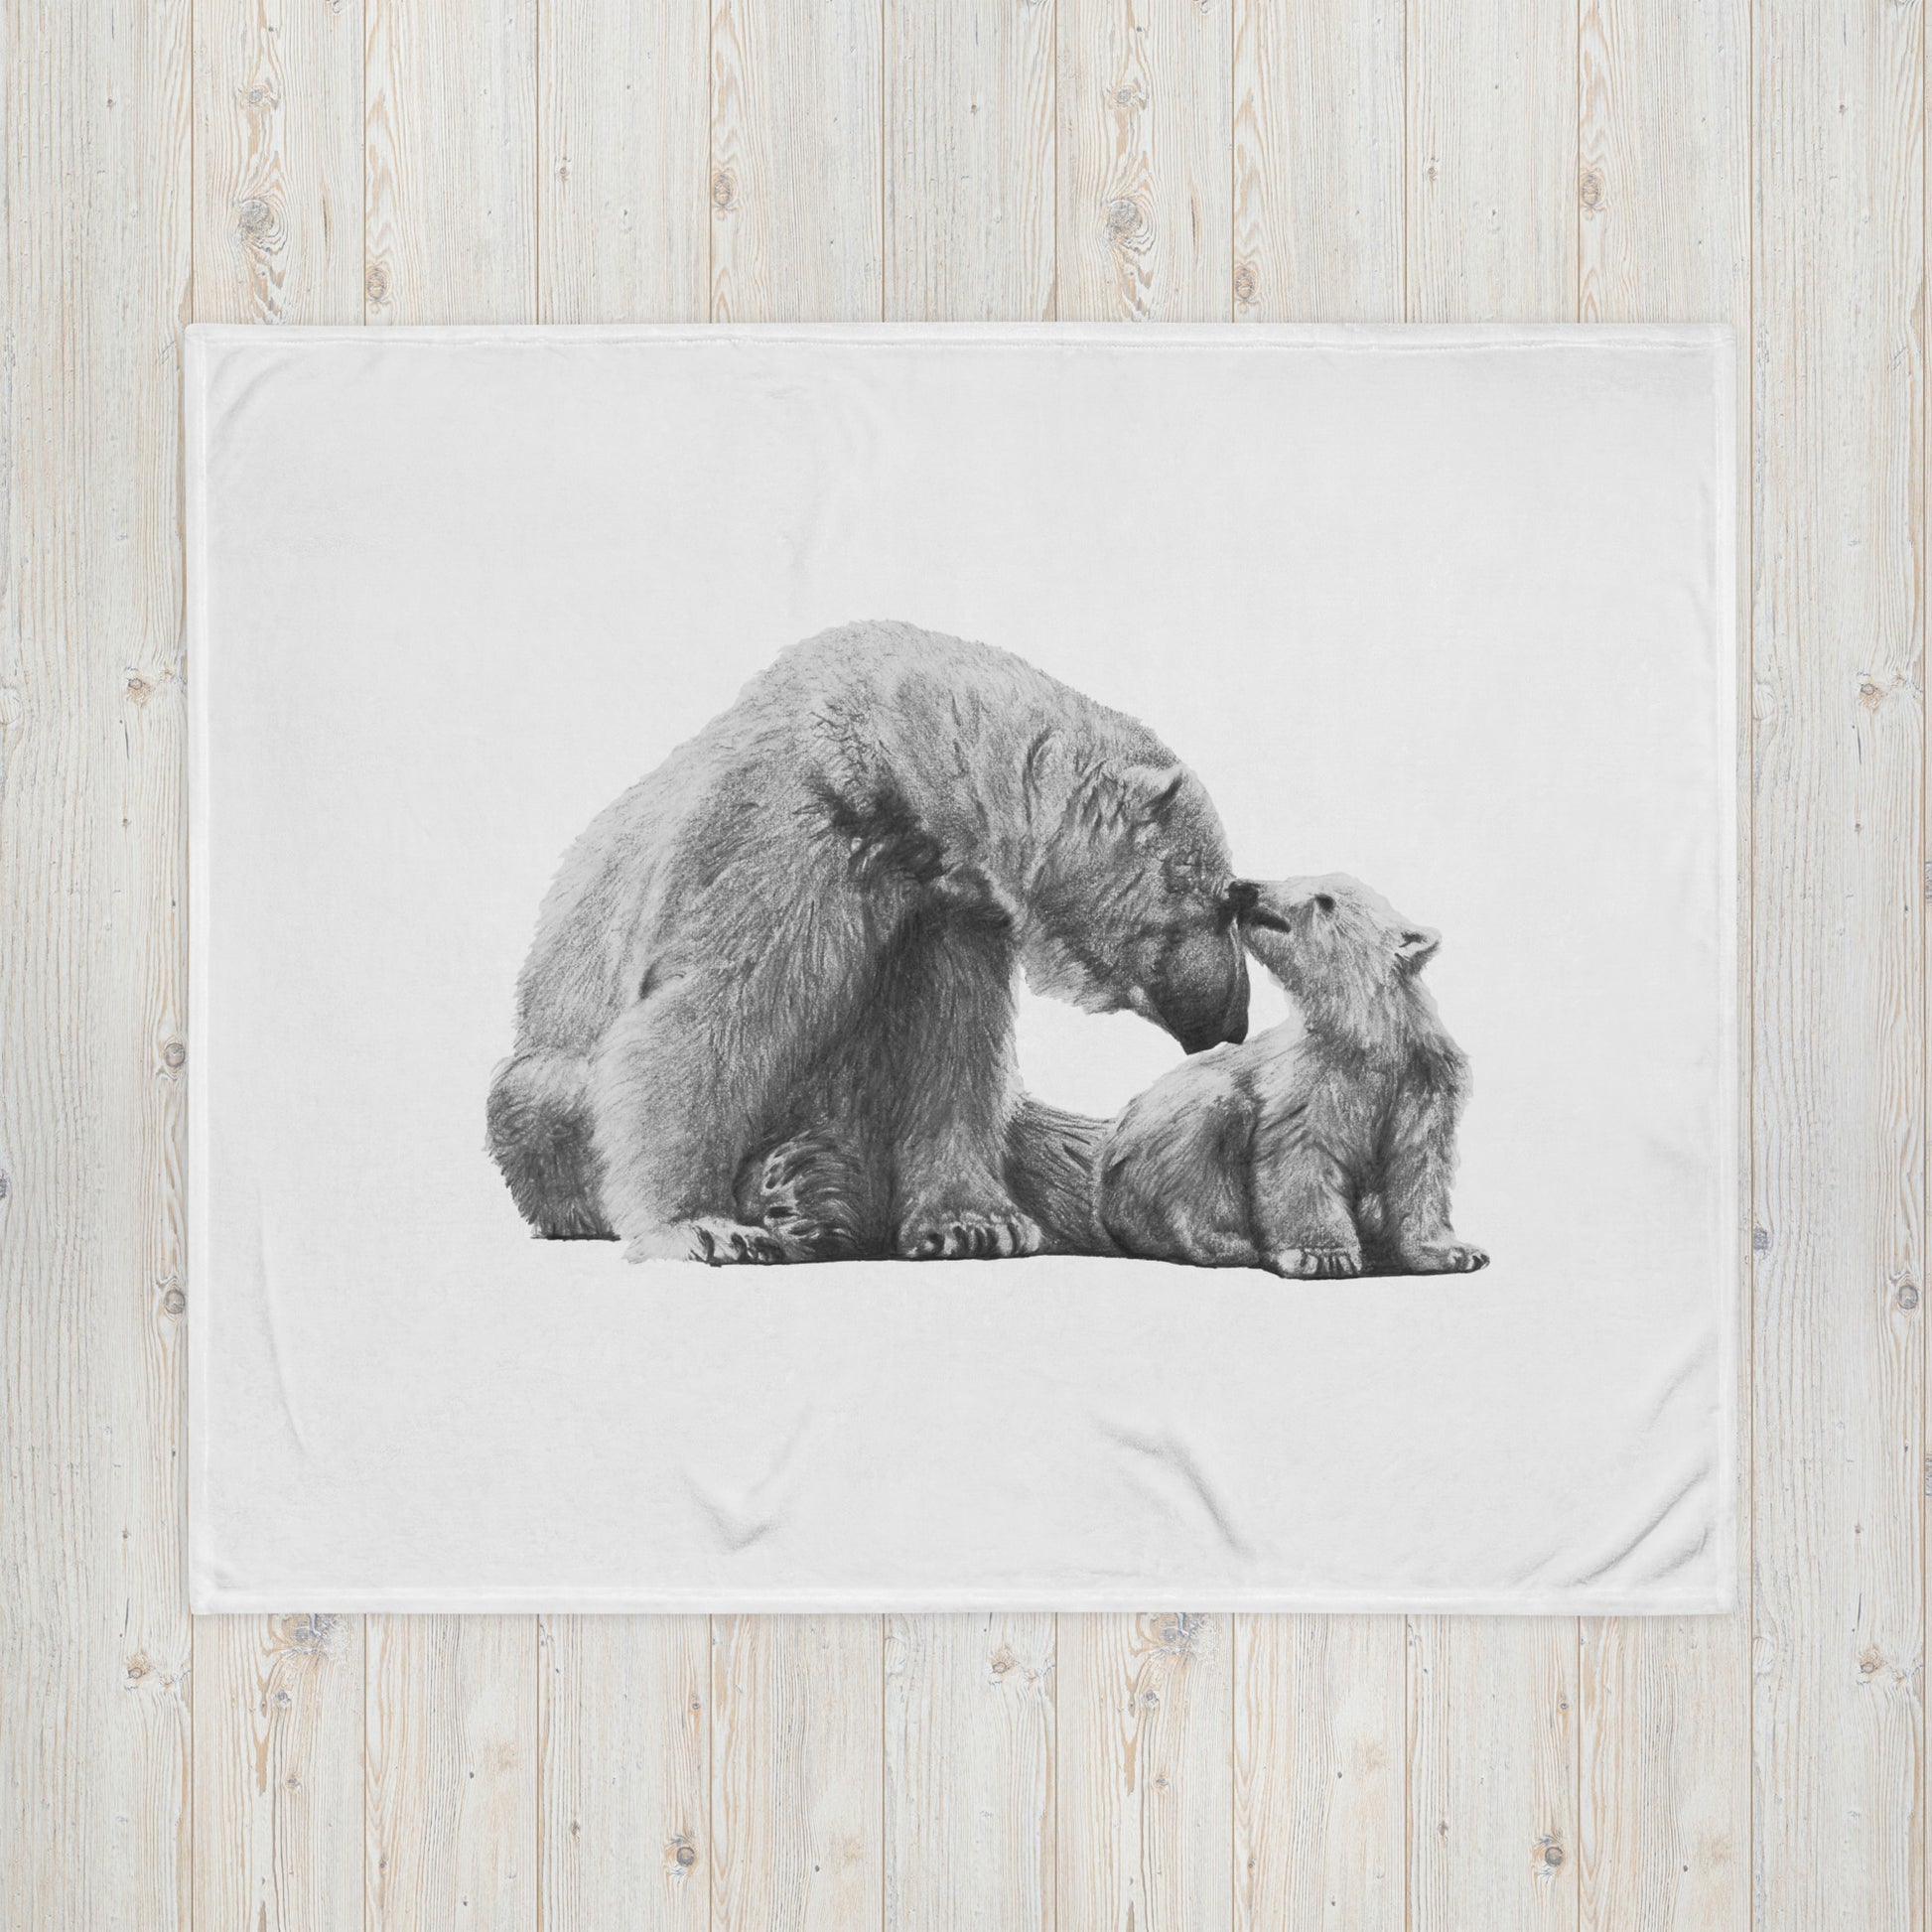 These "Polar Bear Throw Blanket (W)" are from a drawing of mine created with a graphite pencil. It has been digitally optimized and transferred to a 100% Polyester throw blanket.